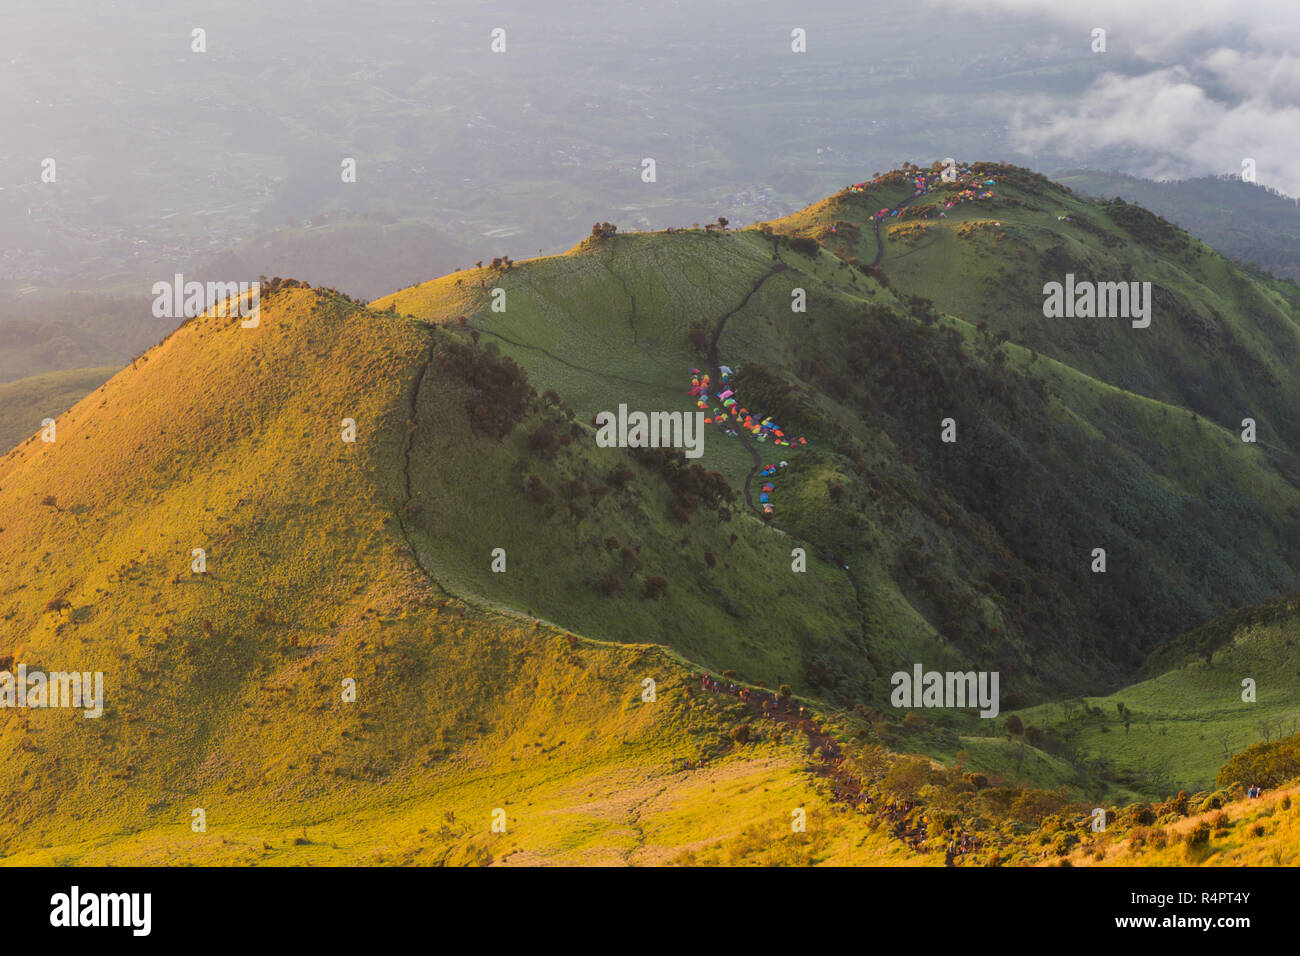 The beauty of the teletubbies hill on Mount Merbabu in the morning Stock Photo